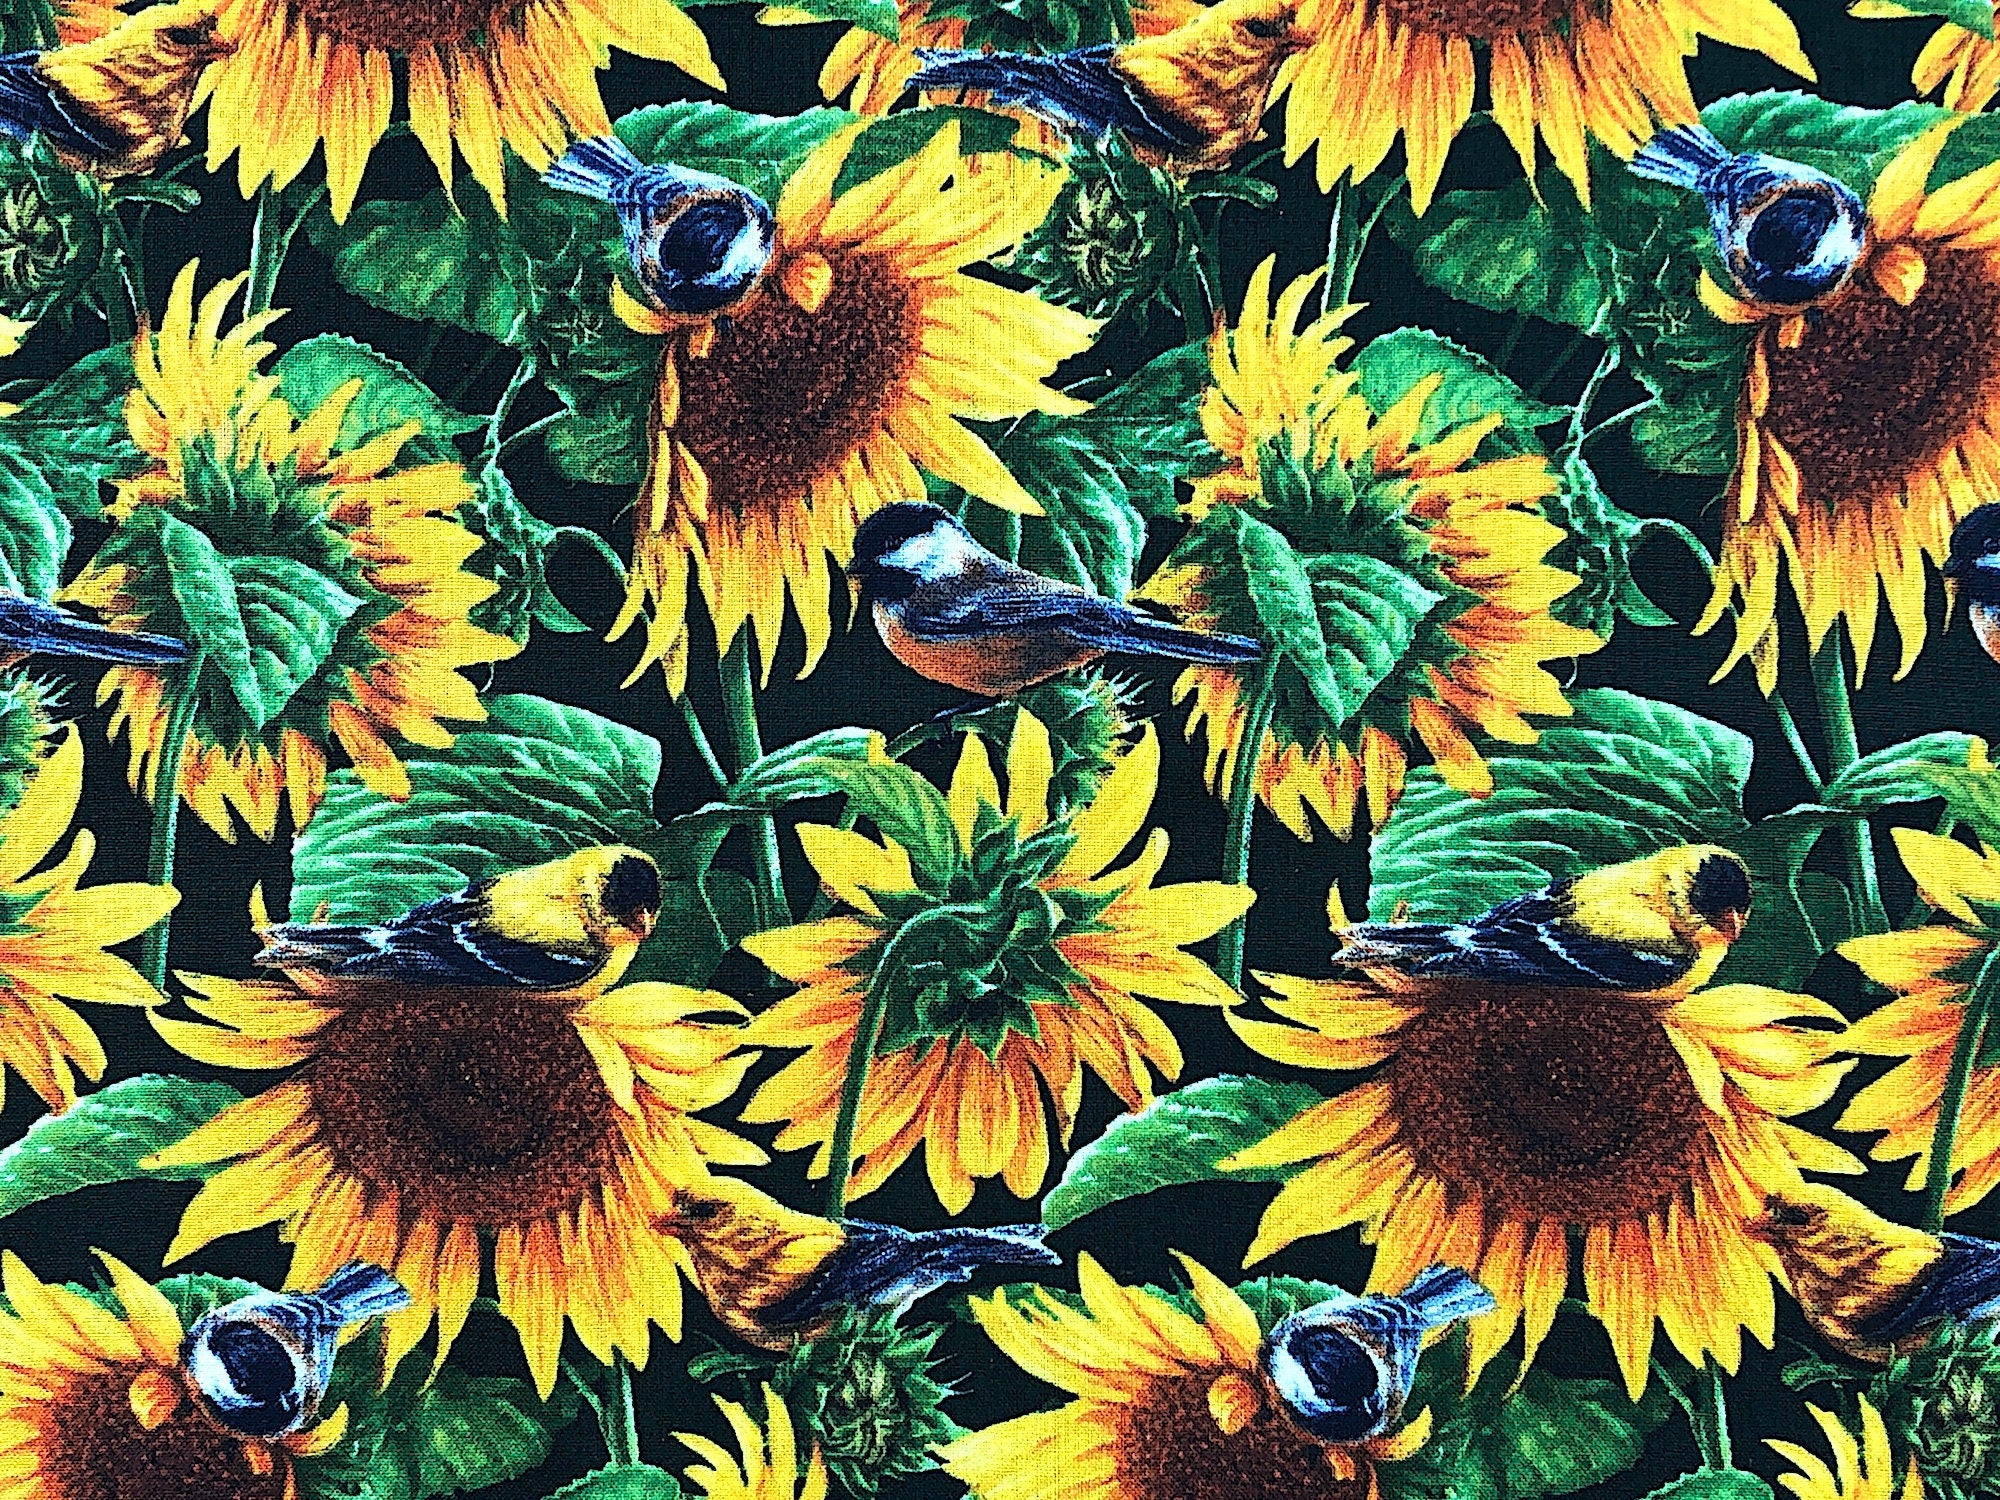 This fabric is covered with sunflowers, leaves and birds.